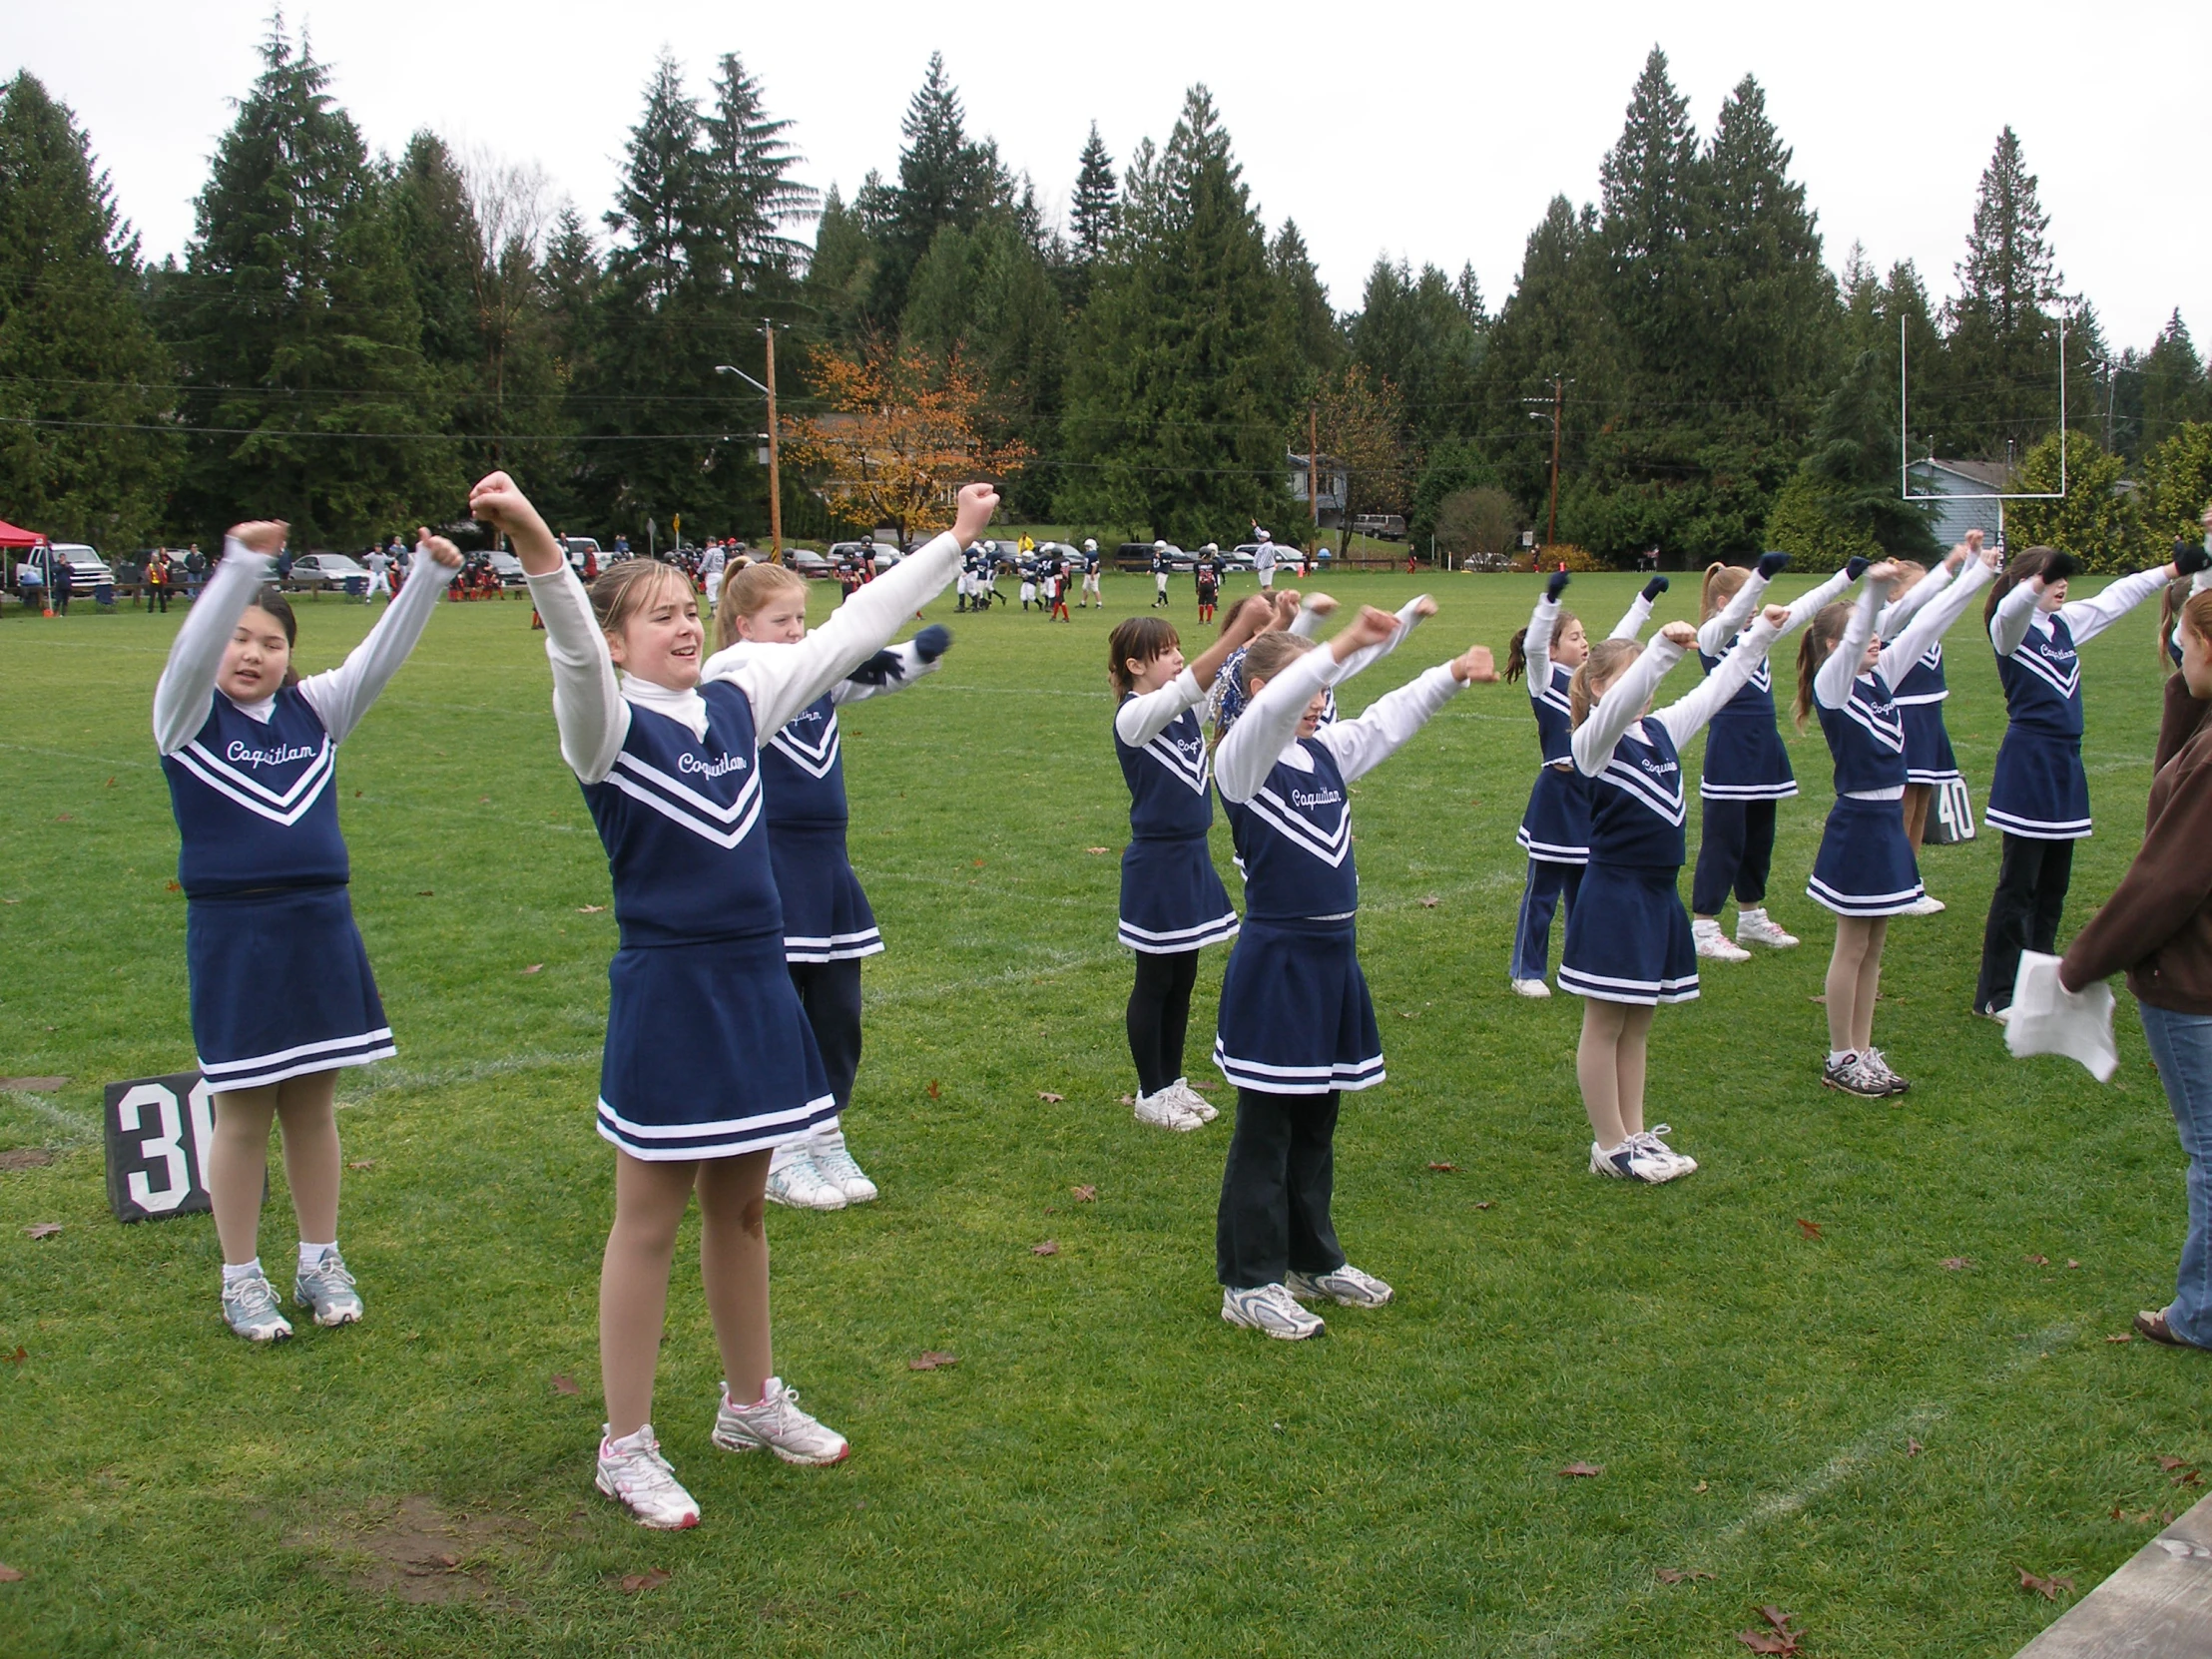 s in cheer costumes are performing a marching trick